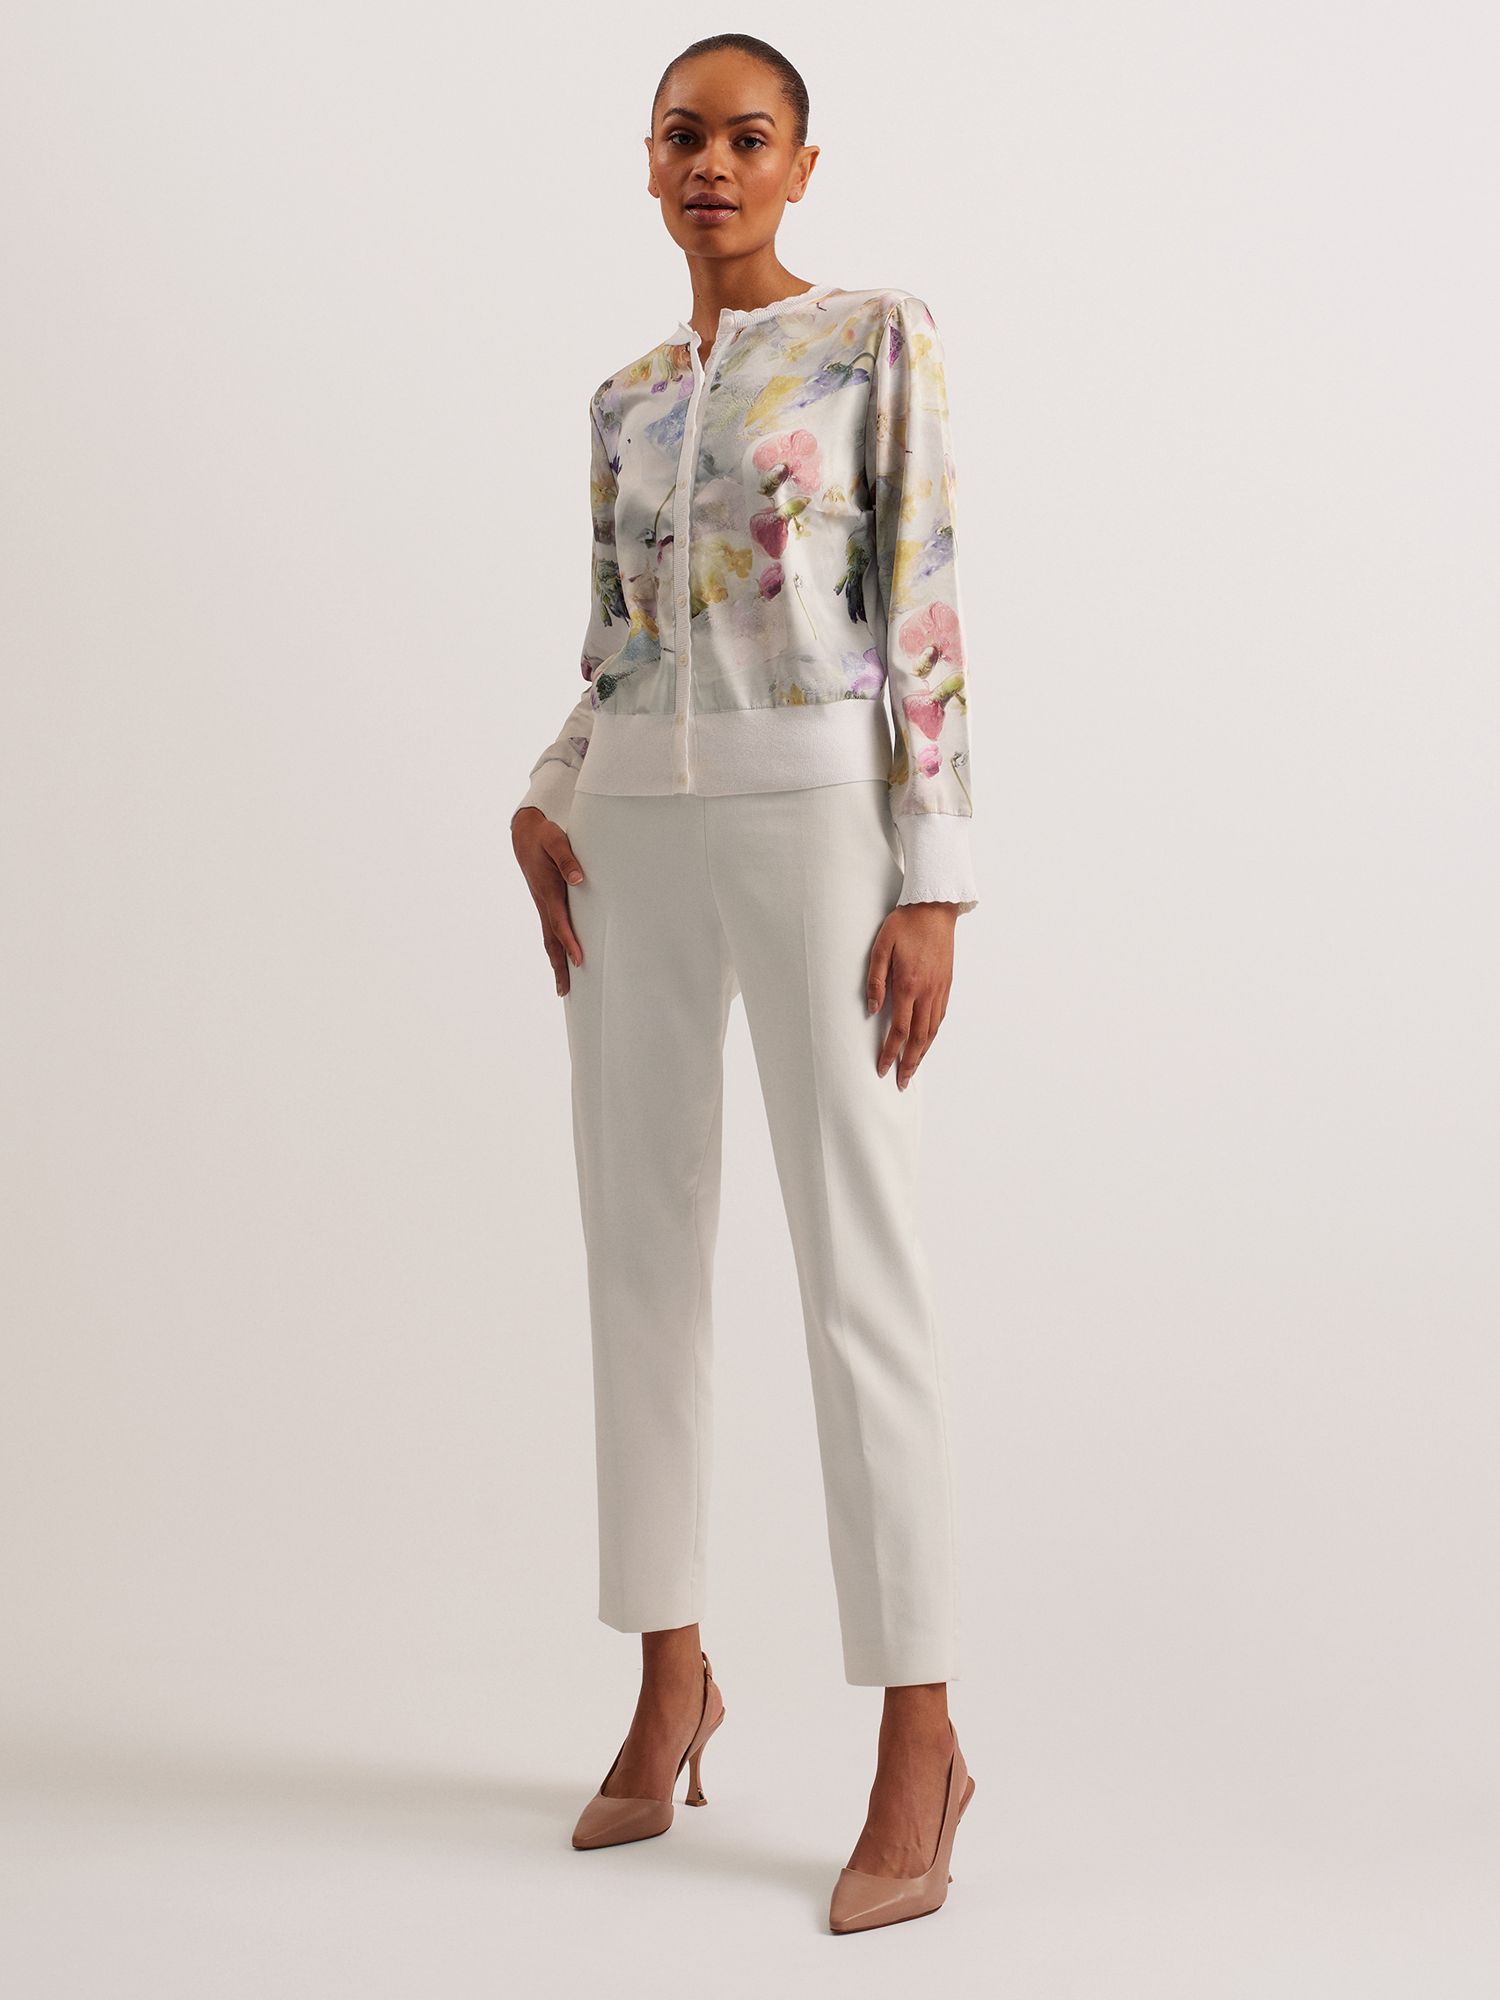 Ted Baker Haylou Floral Woven Front Cardigan, White/Multi, 14